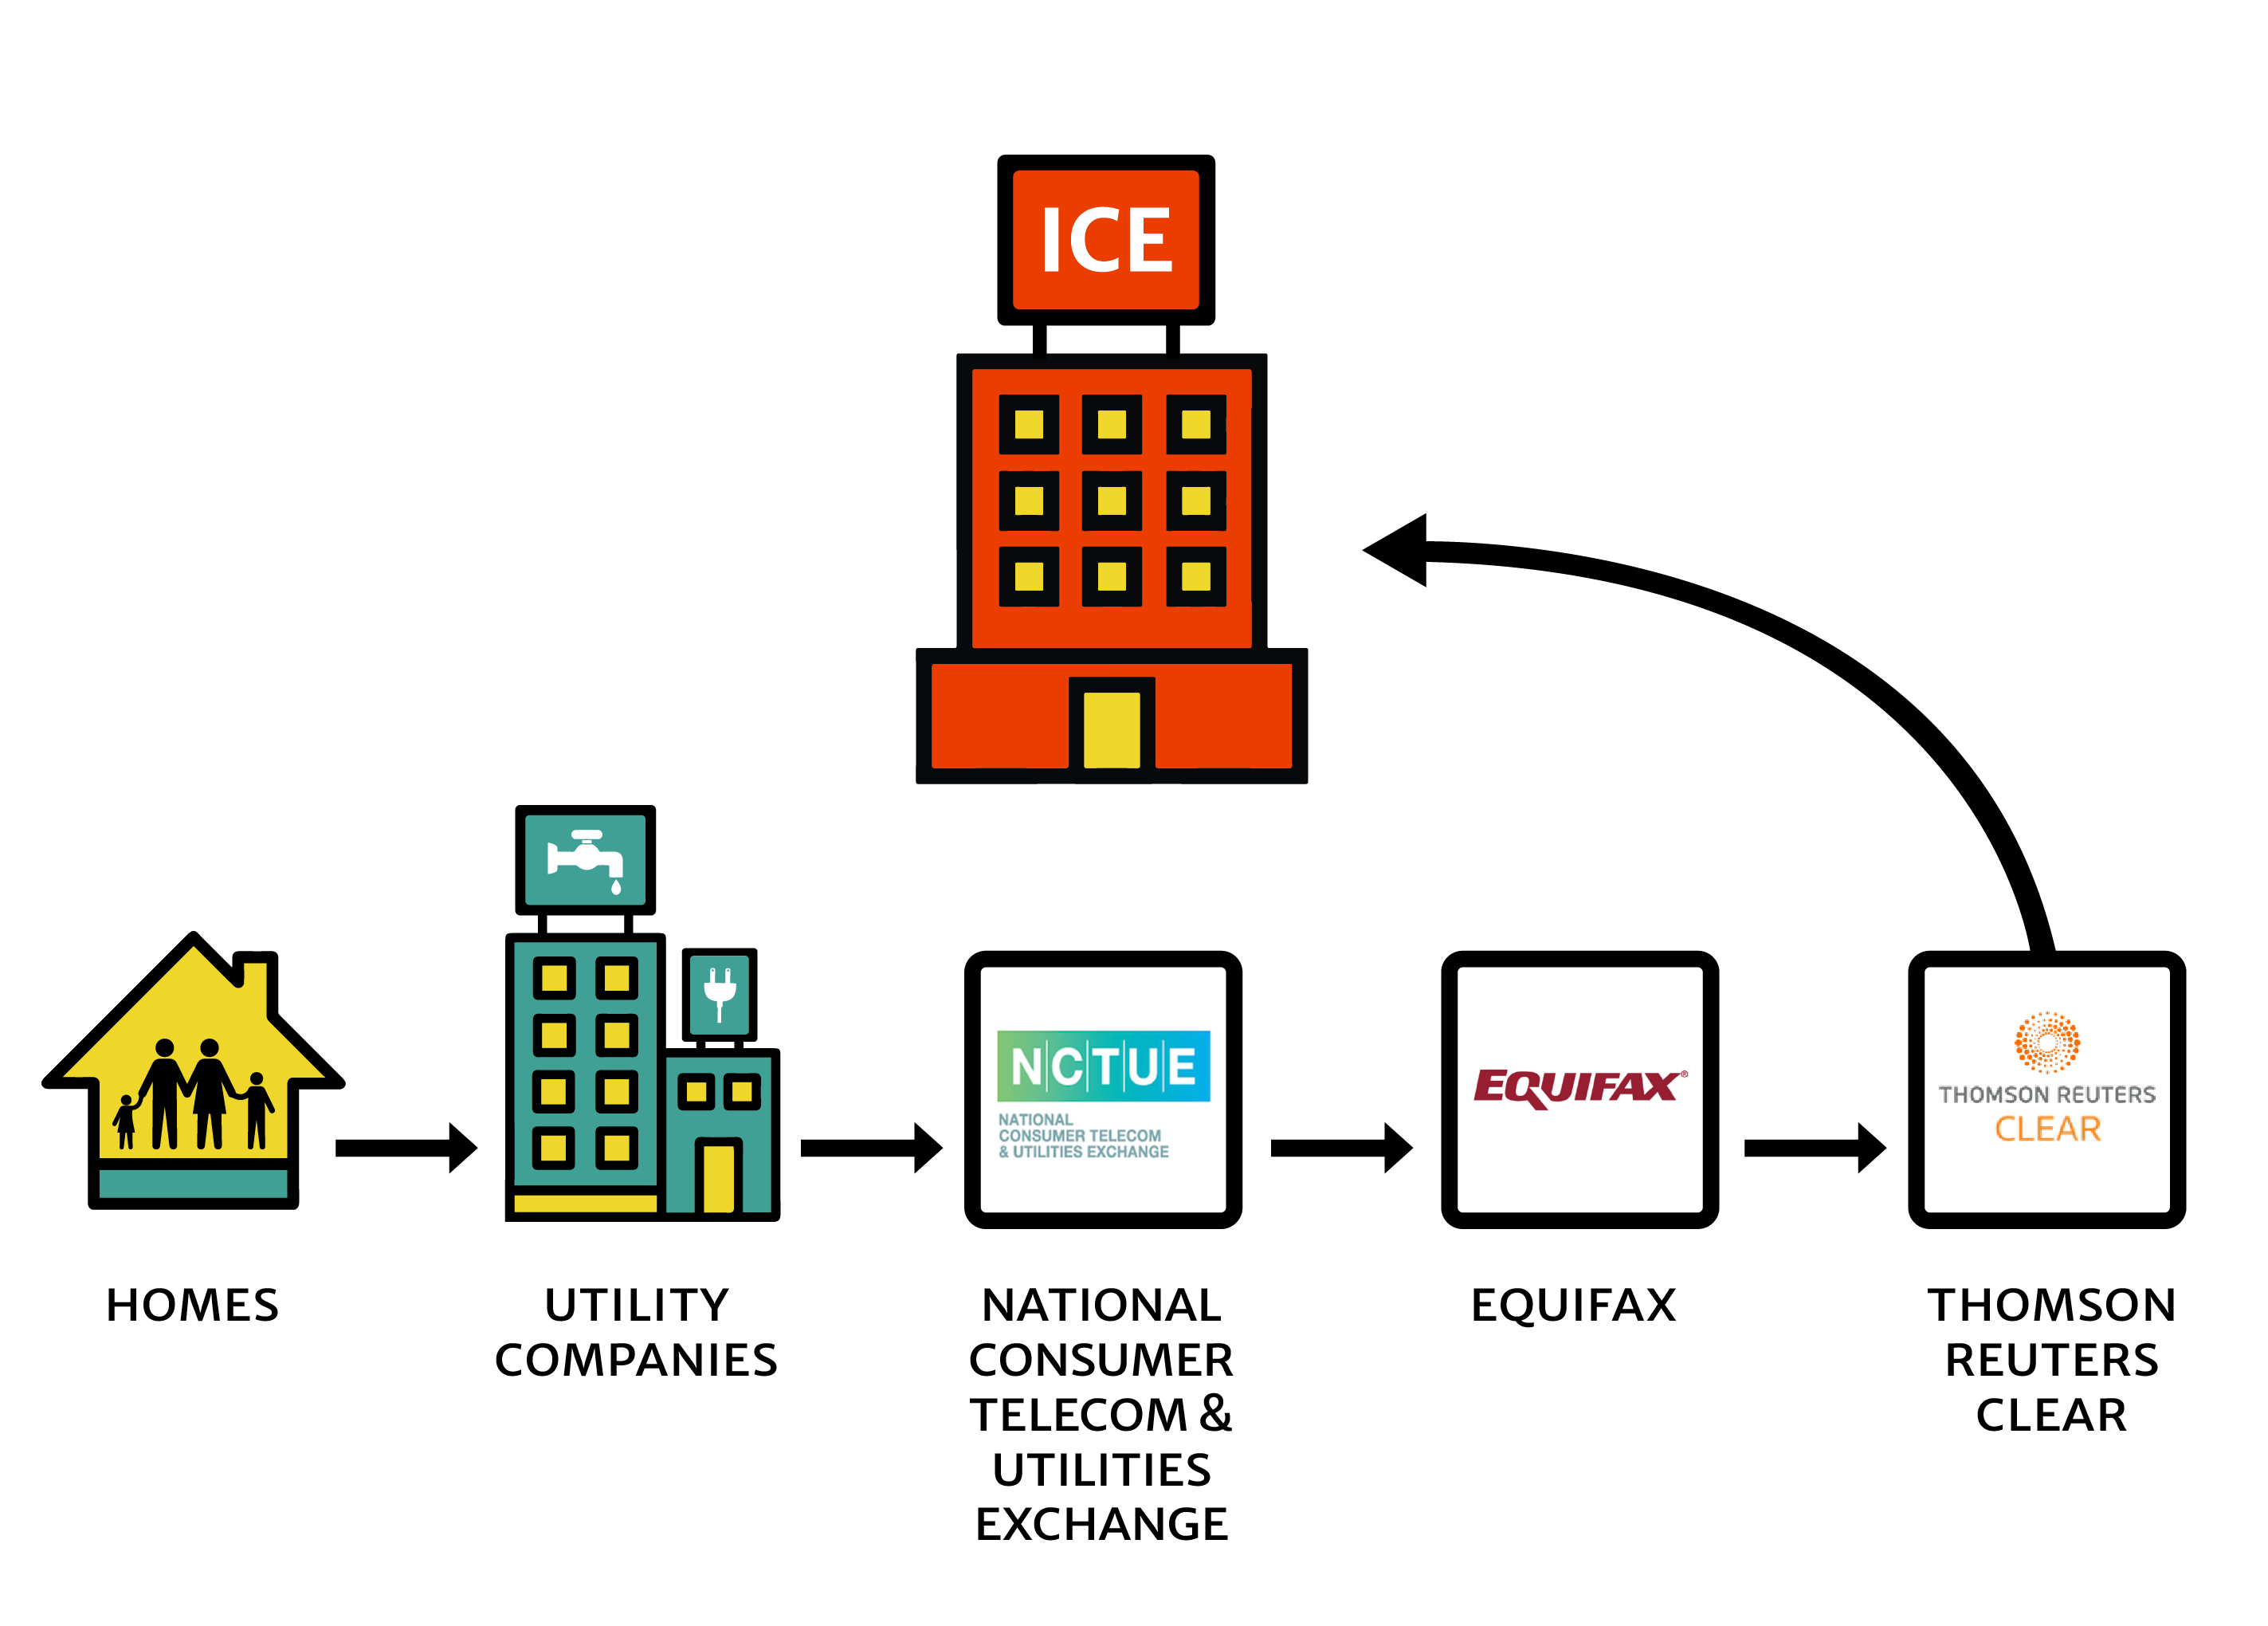 A diagram is shown demonstrating the confirmed flow of utility data from Maryland MVA to NLETS network to FBI's NCIC Database to ICE. The diagram also shows the possible flow of this data from Maryland MVA to Maryland Criminal Justice Dashboard Network to ICE.